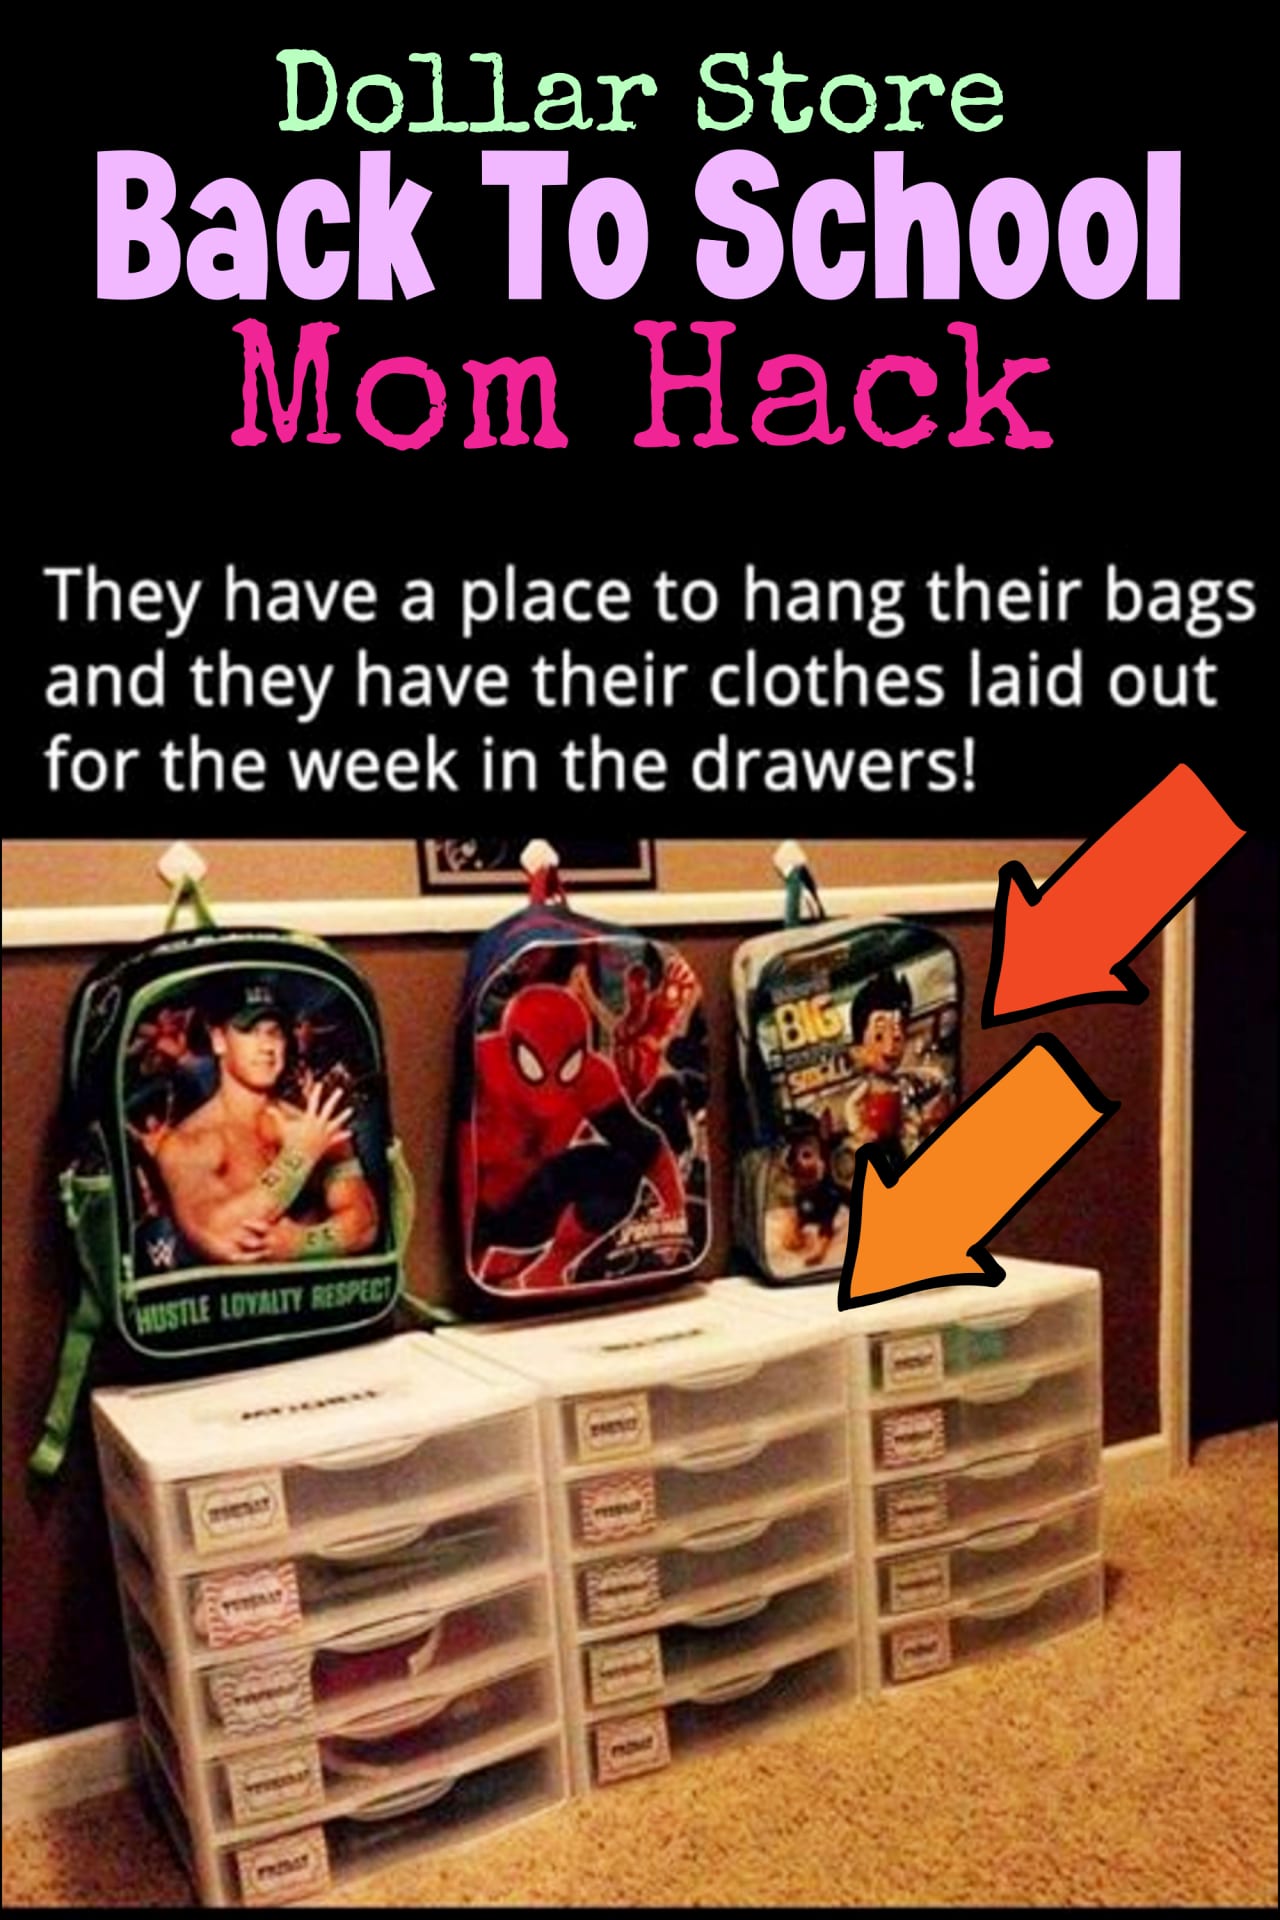 Back To School Organization: Dollar Store Organizing Hacks For Busy Moms -  Learn how to be an organized mom with these back to school organization ideas and morning routines hacks for kids.